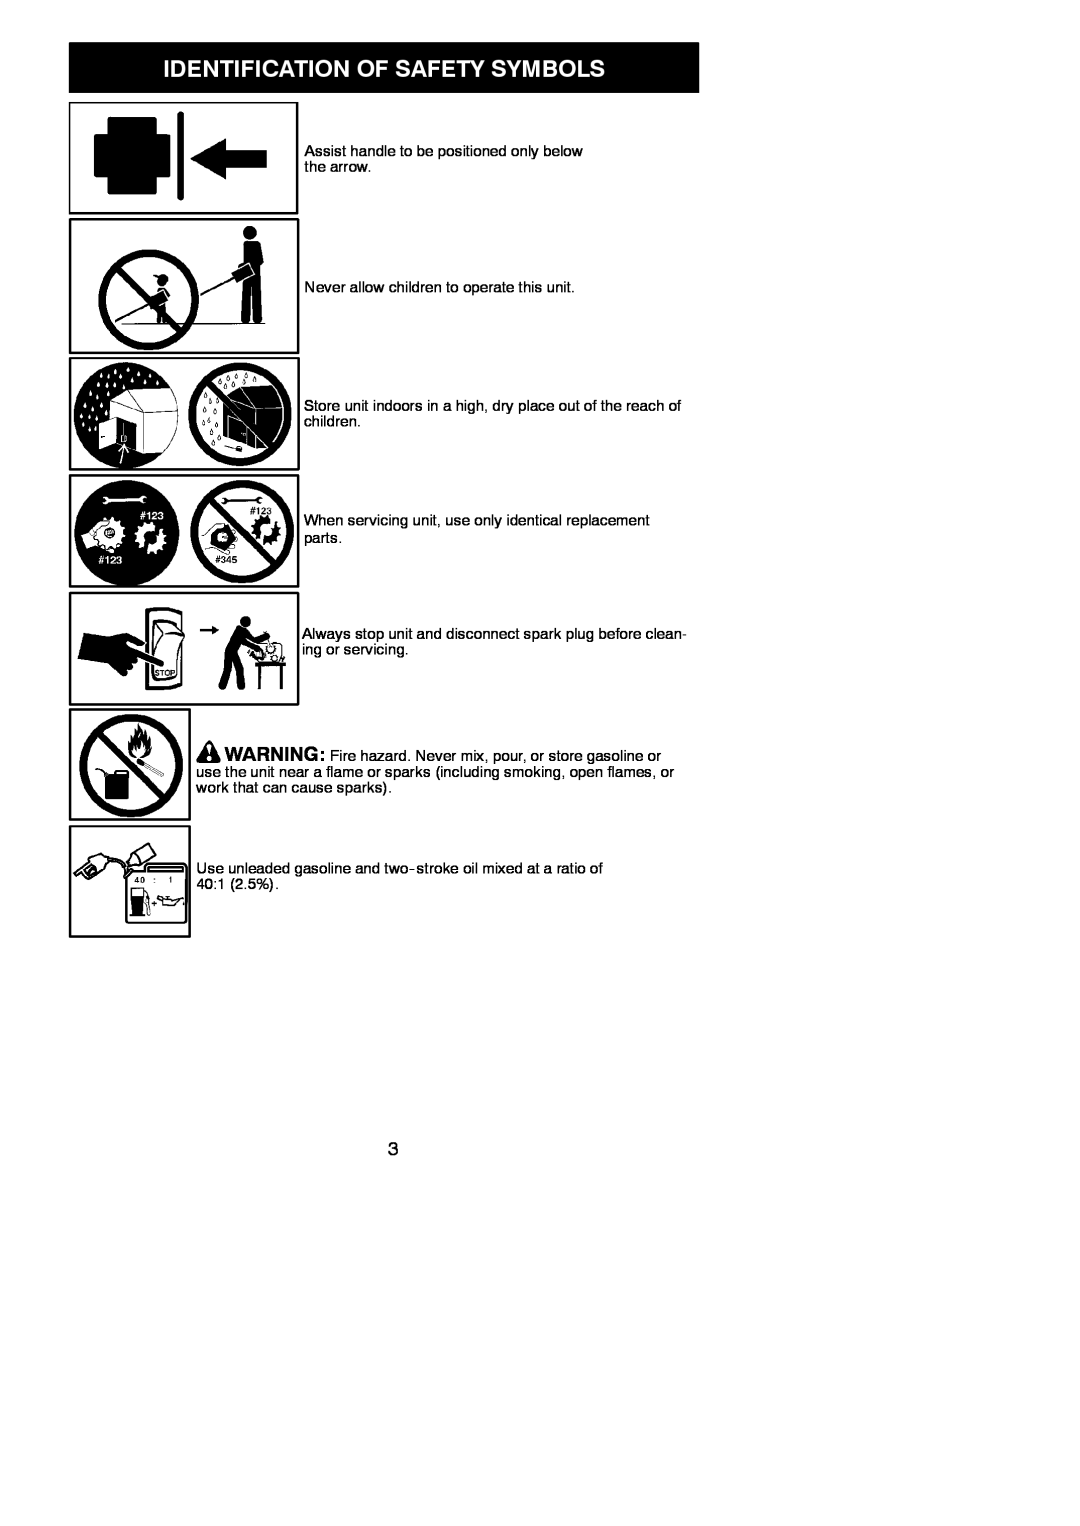 Poulan 545186846 instruction manual Identification Of Safety Symbols, Never allow children to operate this unit 